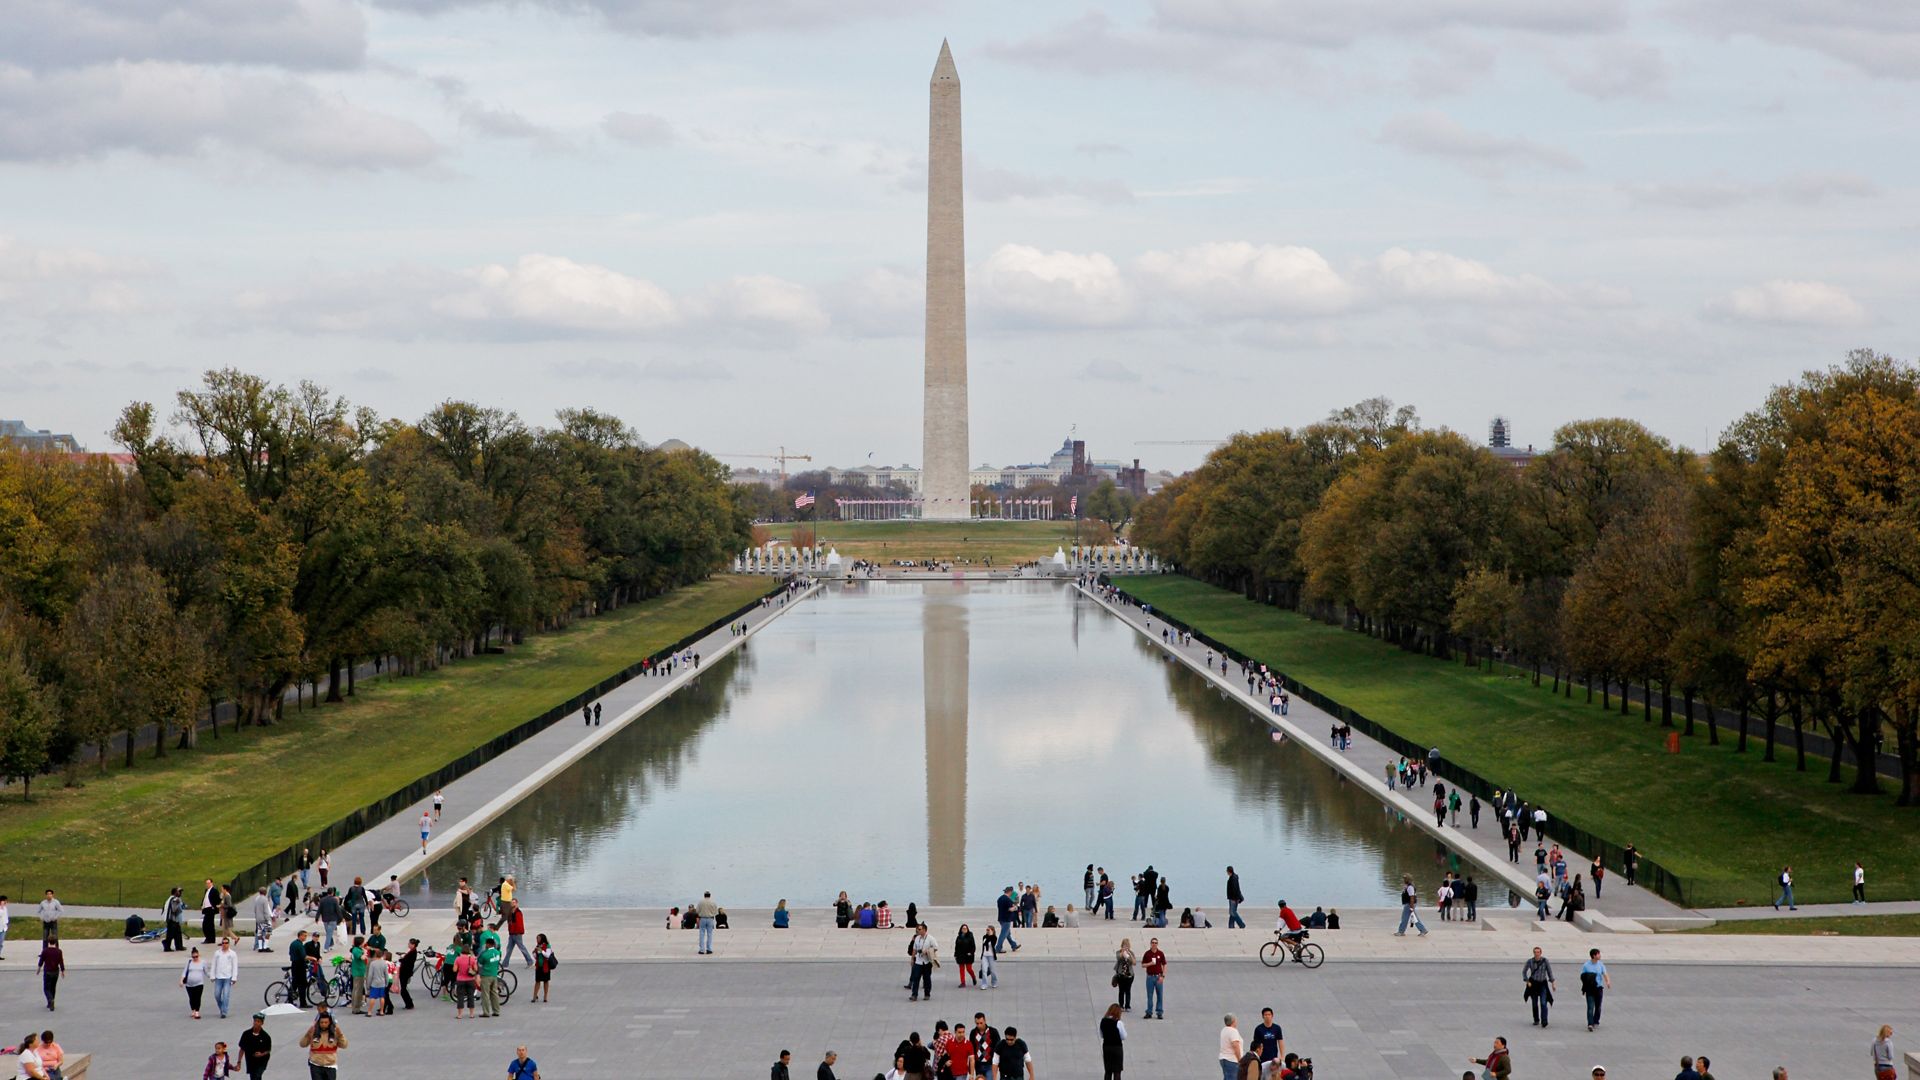 Lincoln Memorial Reflecting Pool in Washington D.C. made with Sika Watertight Concrete System